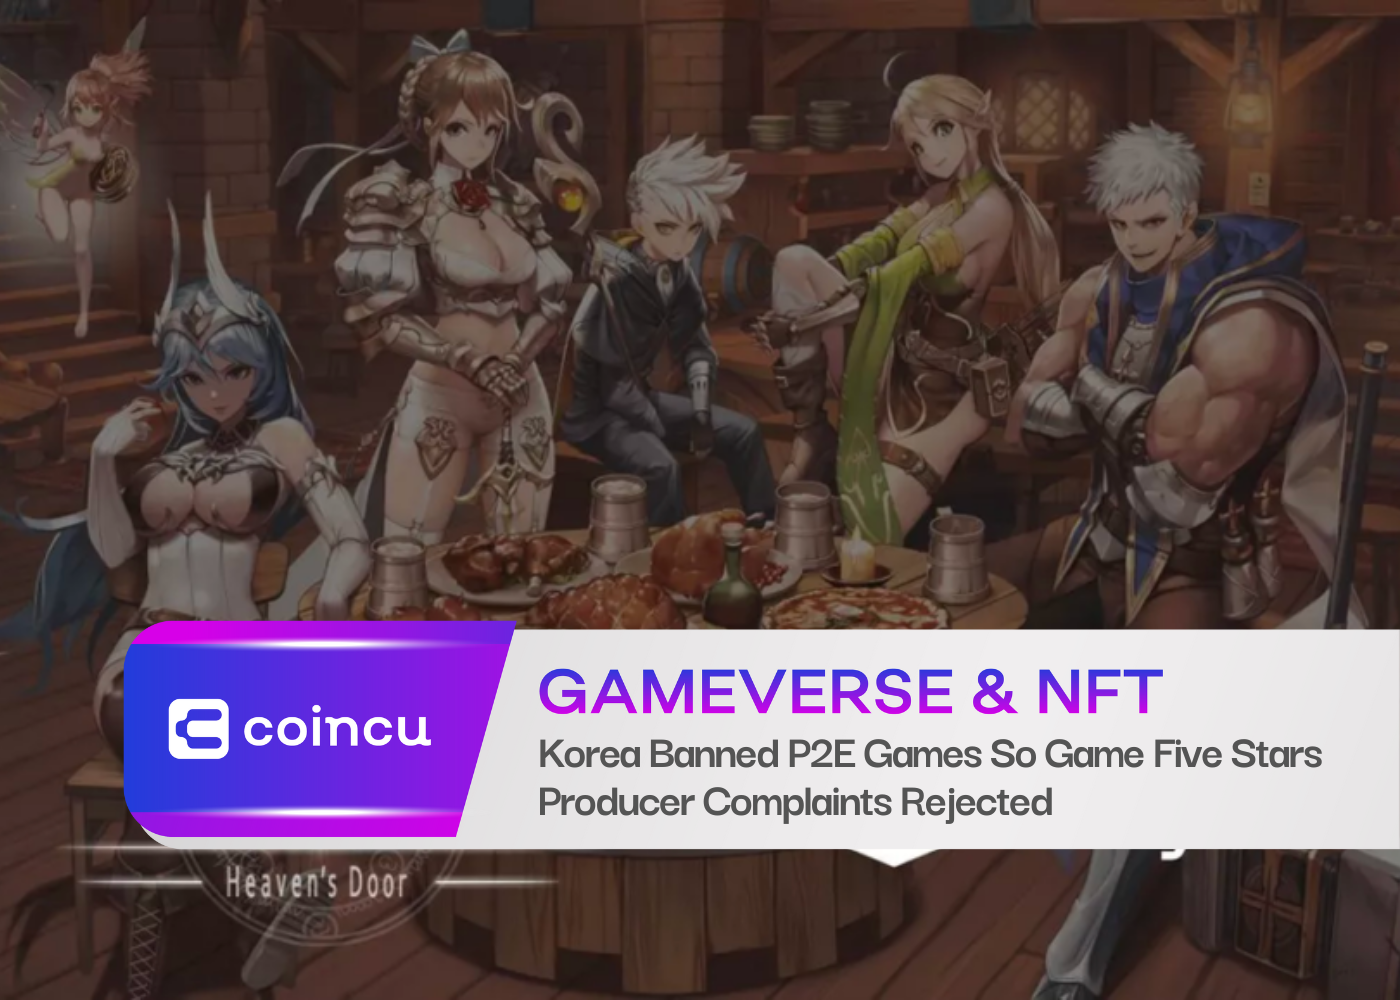 Korea Banned P2E Games So Game Five Stars Producer Complaints Rejected